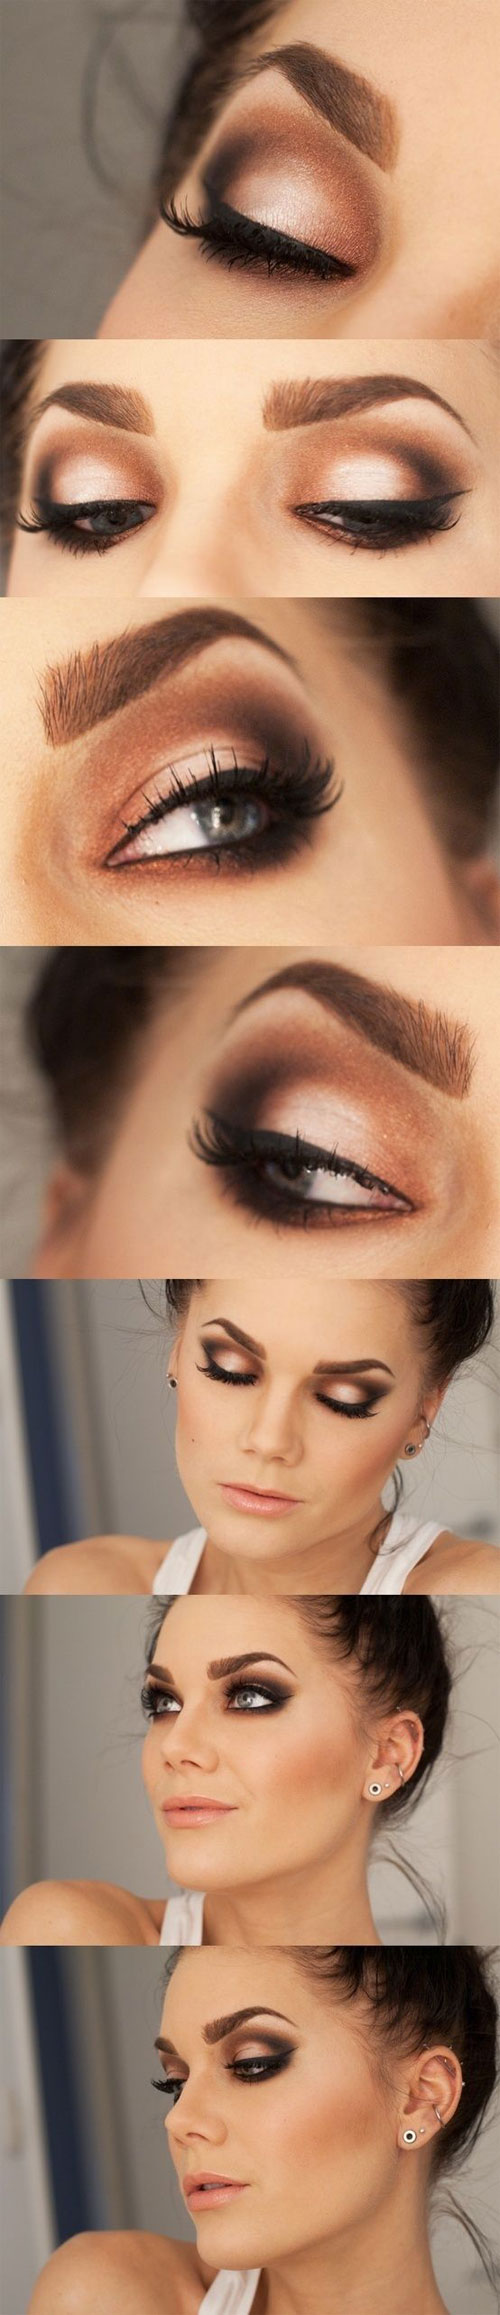 15-Easy-Step-By Step-Valentine's-Day-MakeUp-Tutorials-For-Beginners-&-Learners-2016-13